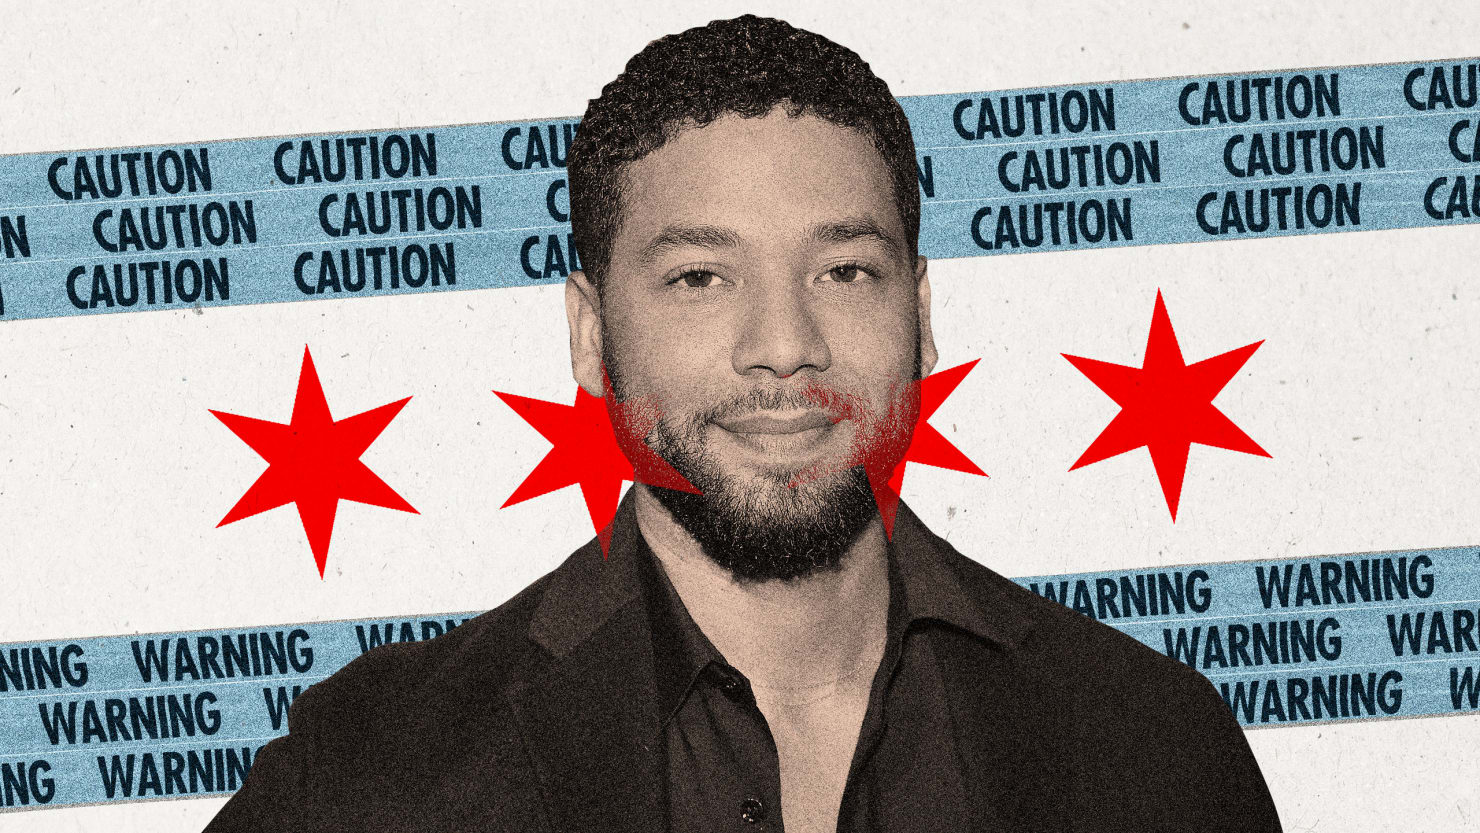 The Jussie Smollett Case and the Murder Chicago PD Could've Been Investigating Instead